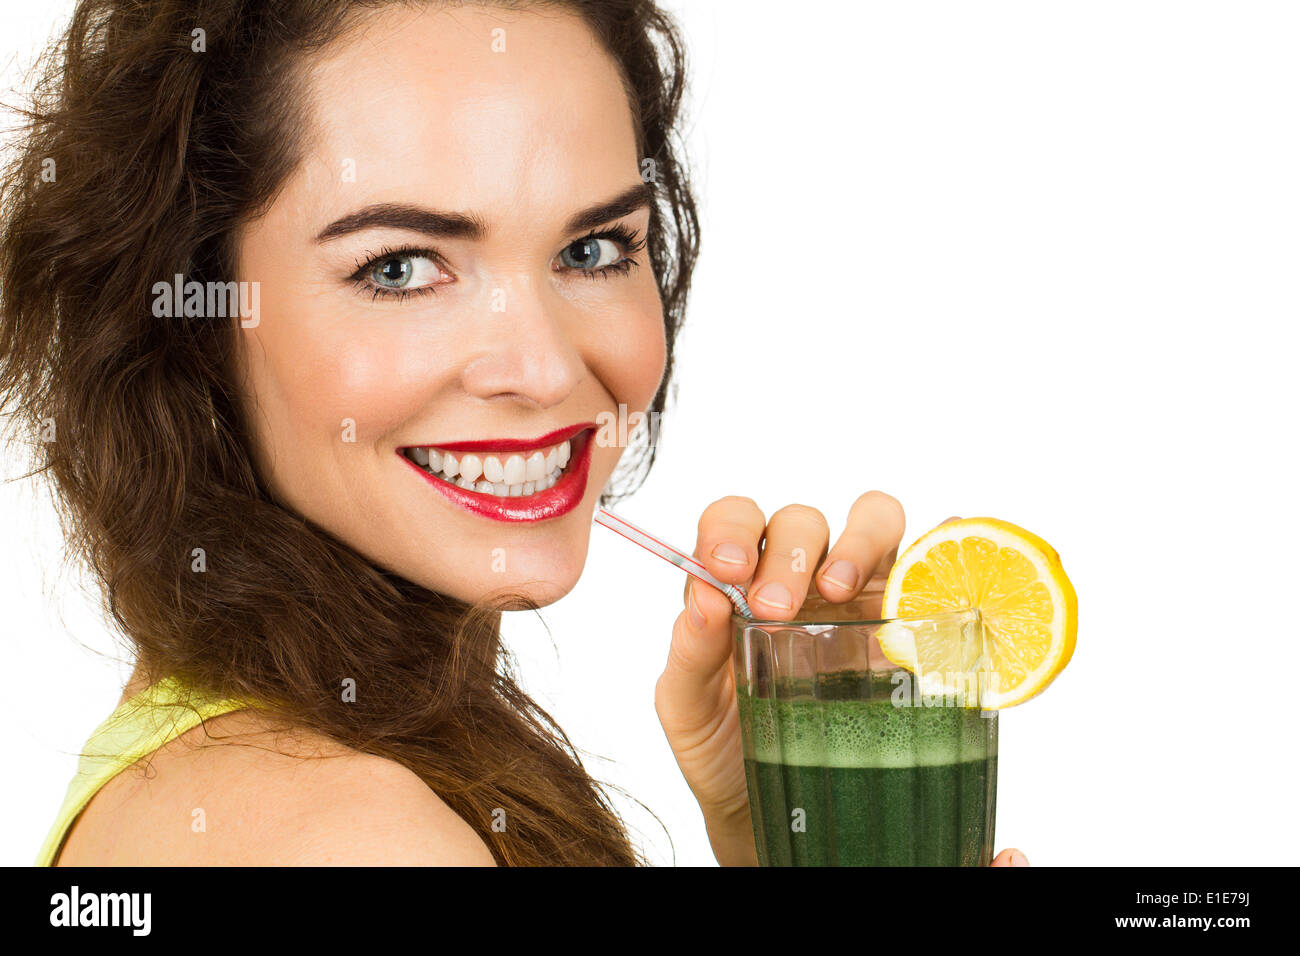 Close-up portrait of a beautiful healthy woman drinking an organic green smoothie. Isolated on white. Stock Photo